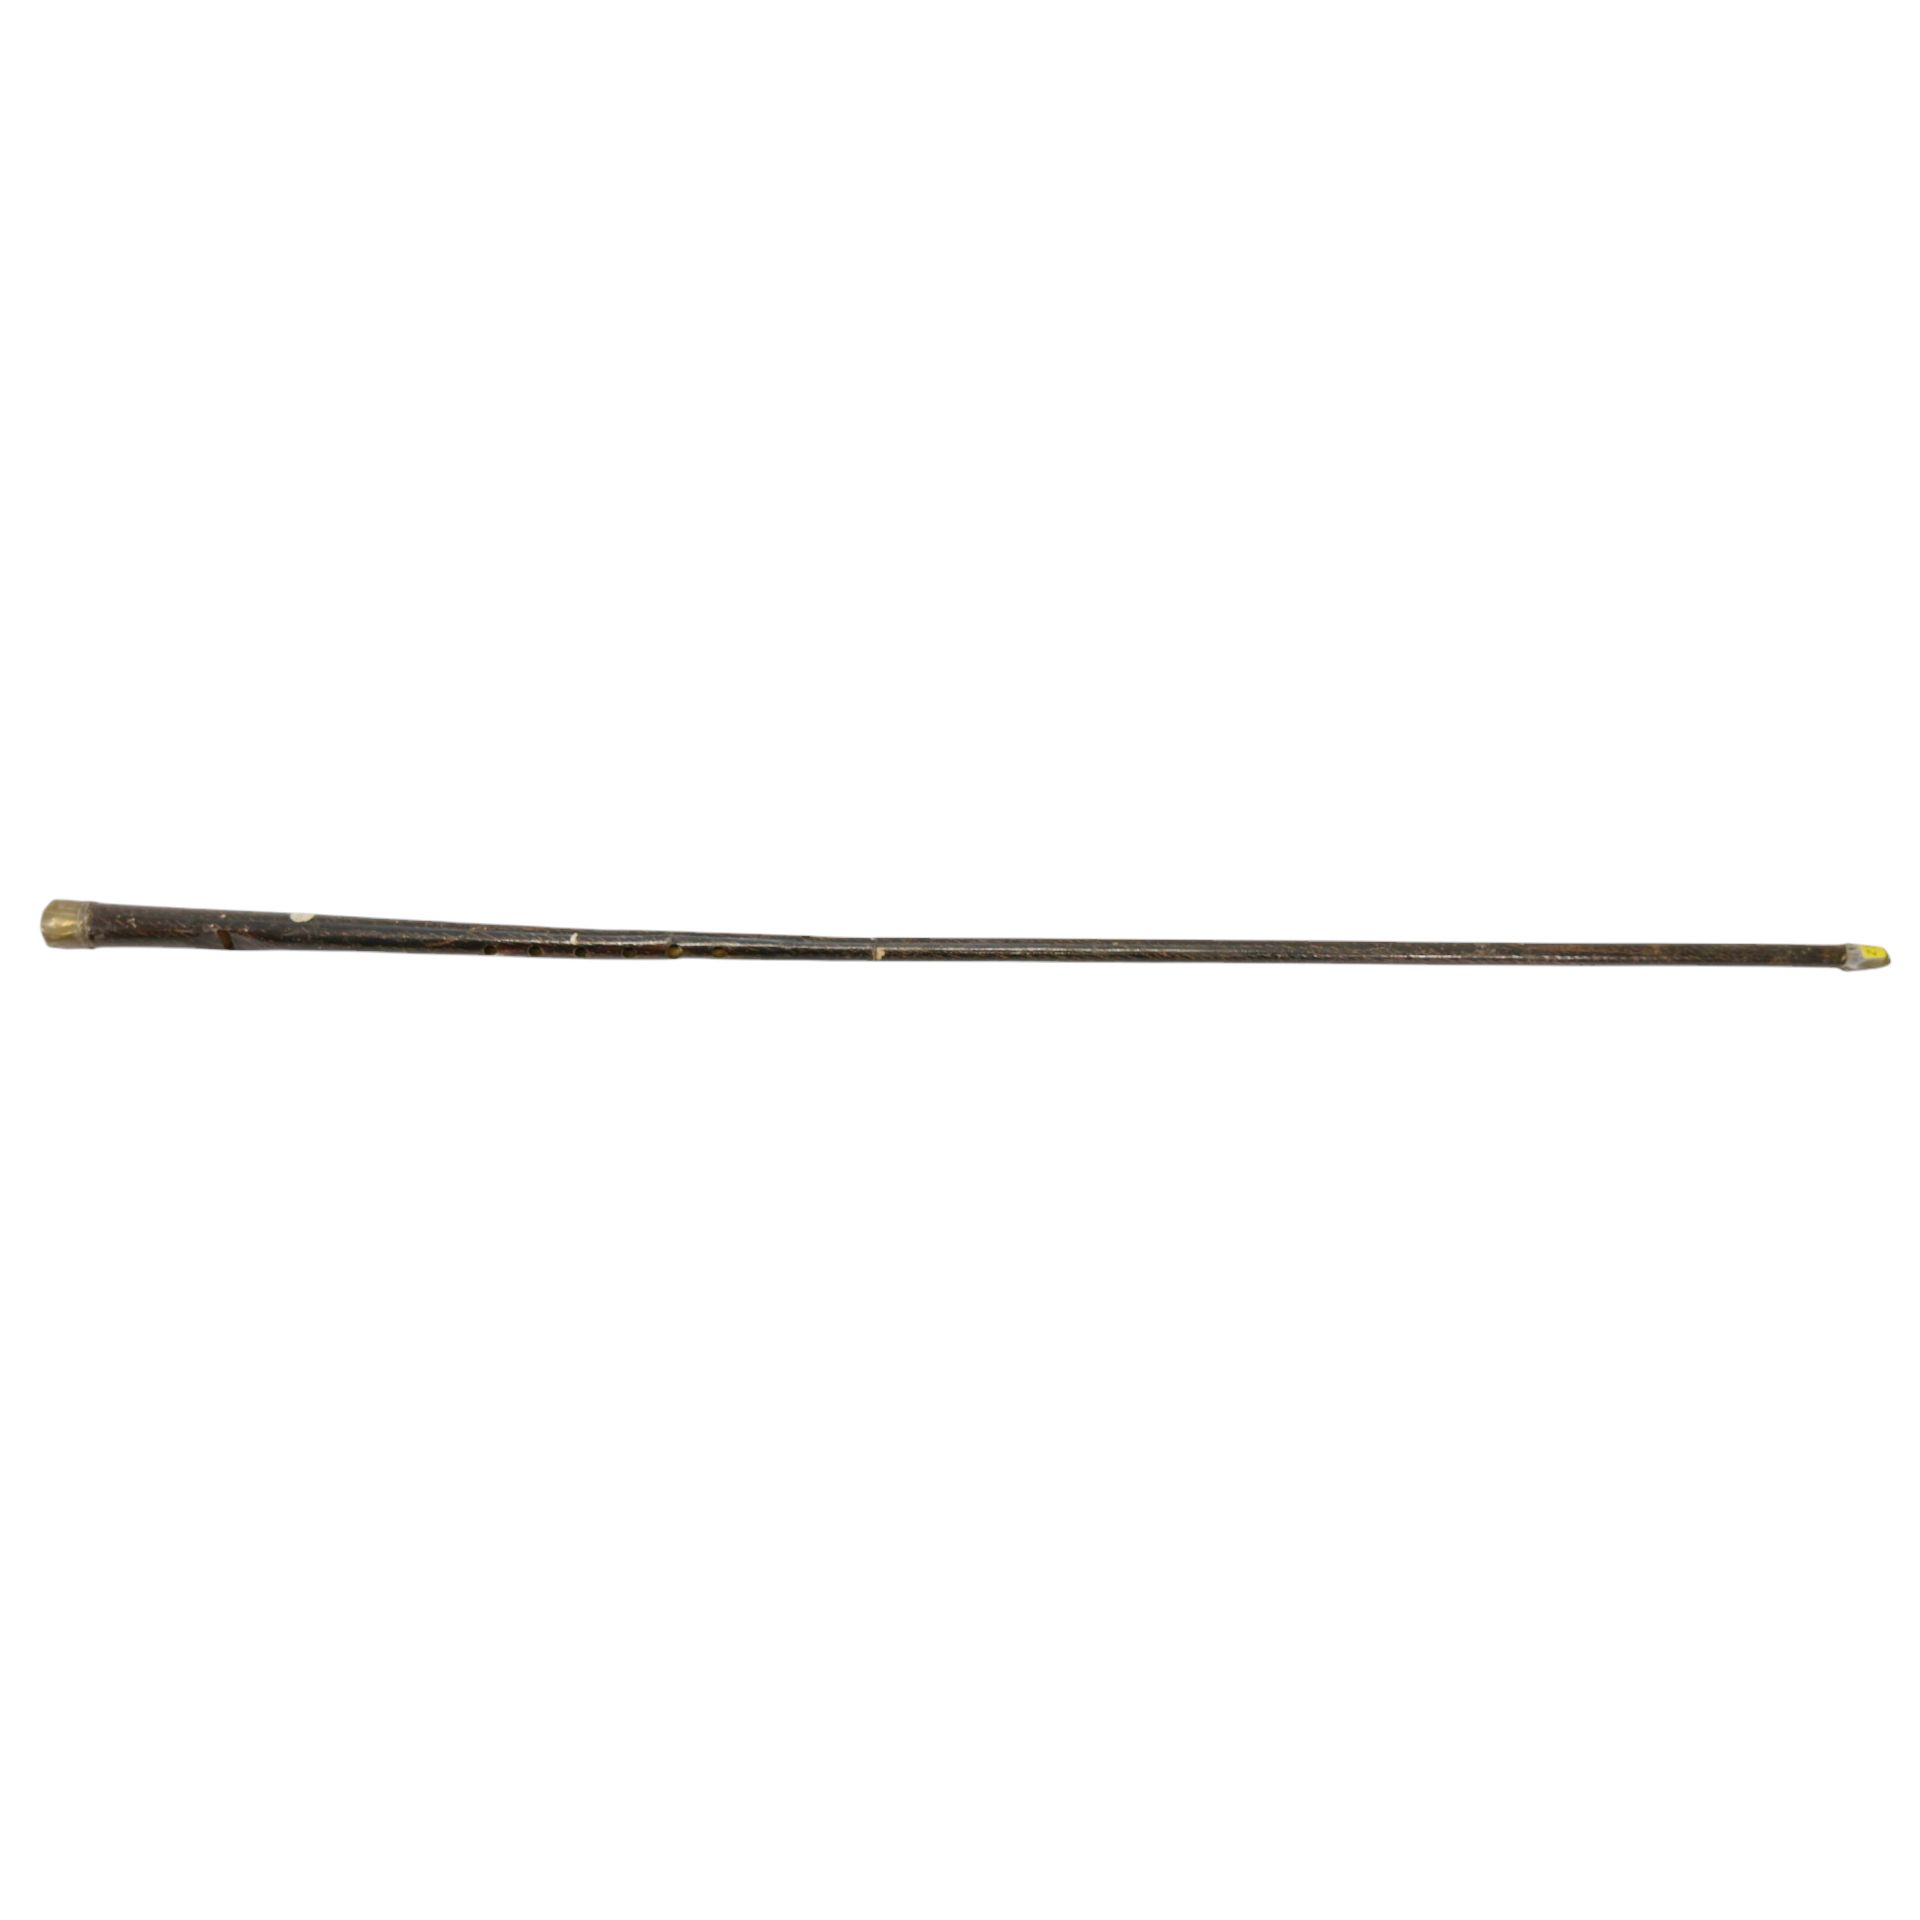 A rare Walking Stick Flute Cane, 19th century. - Image 2 of 5